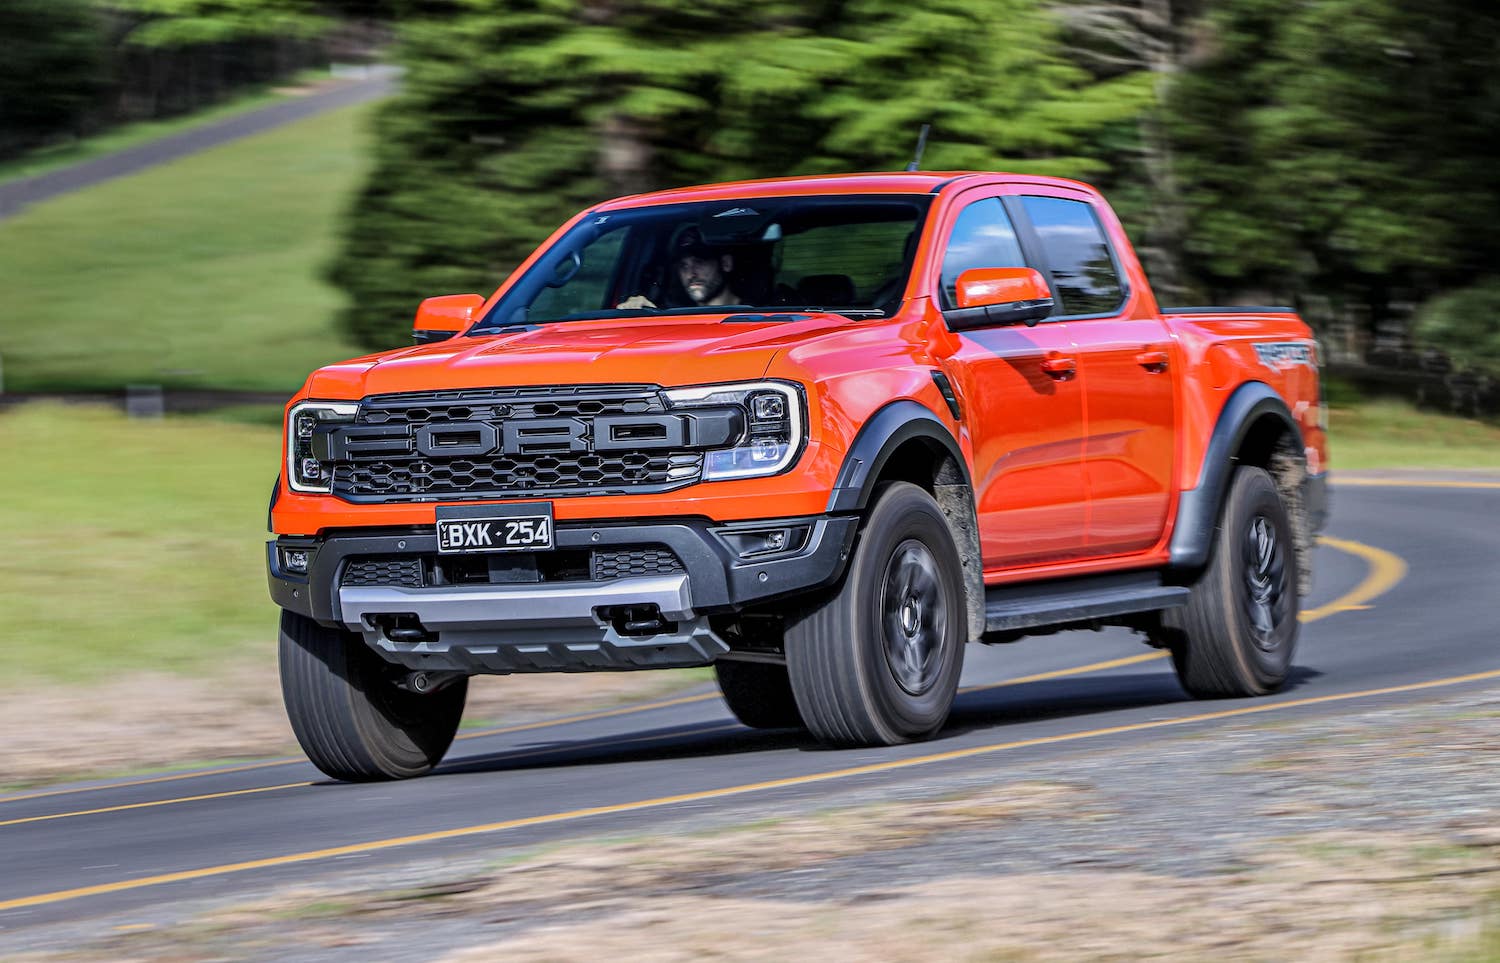 Ford Ranger Raptor Is Already Sold Out In Brazil